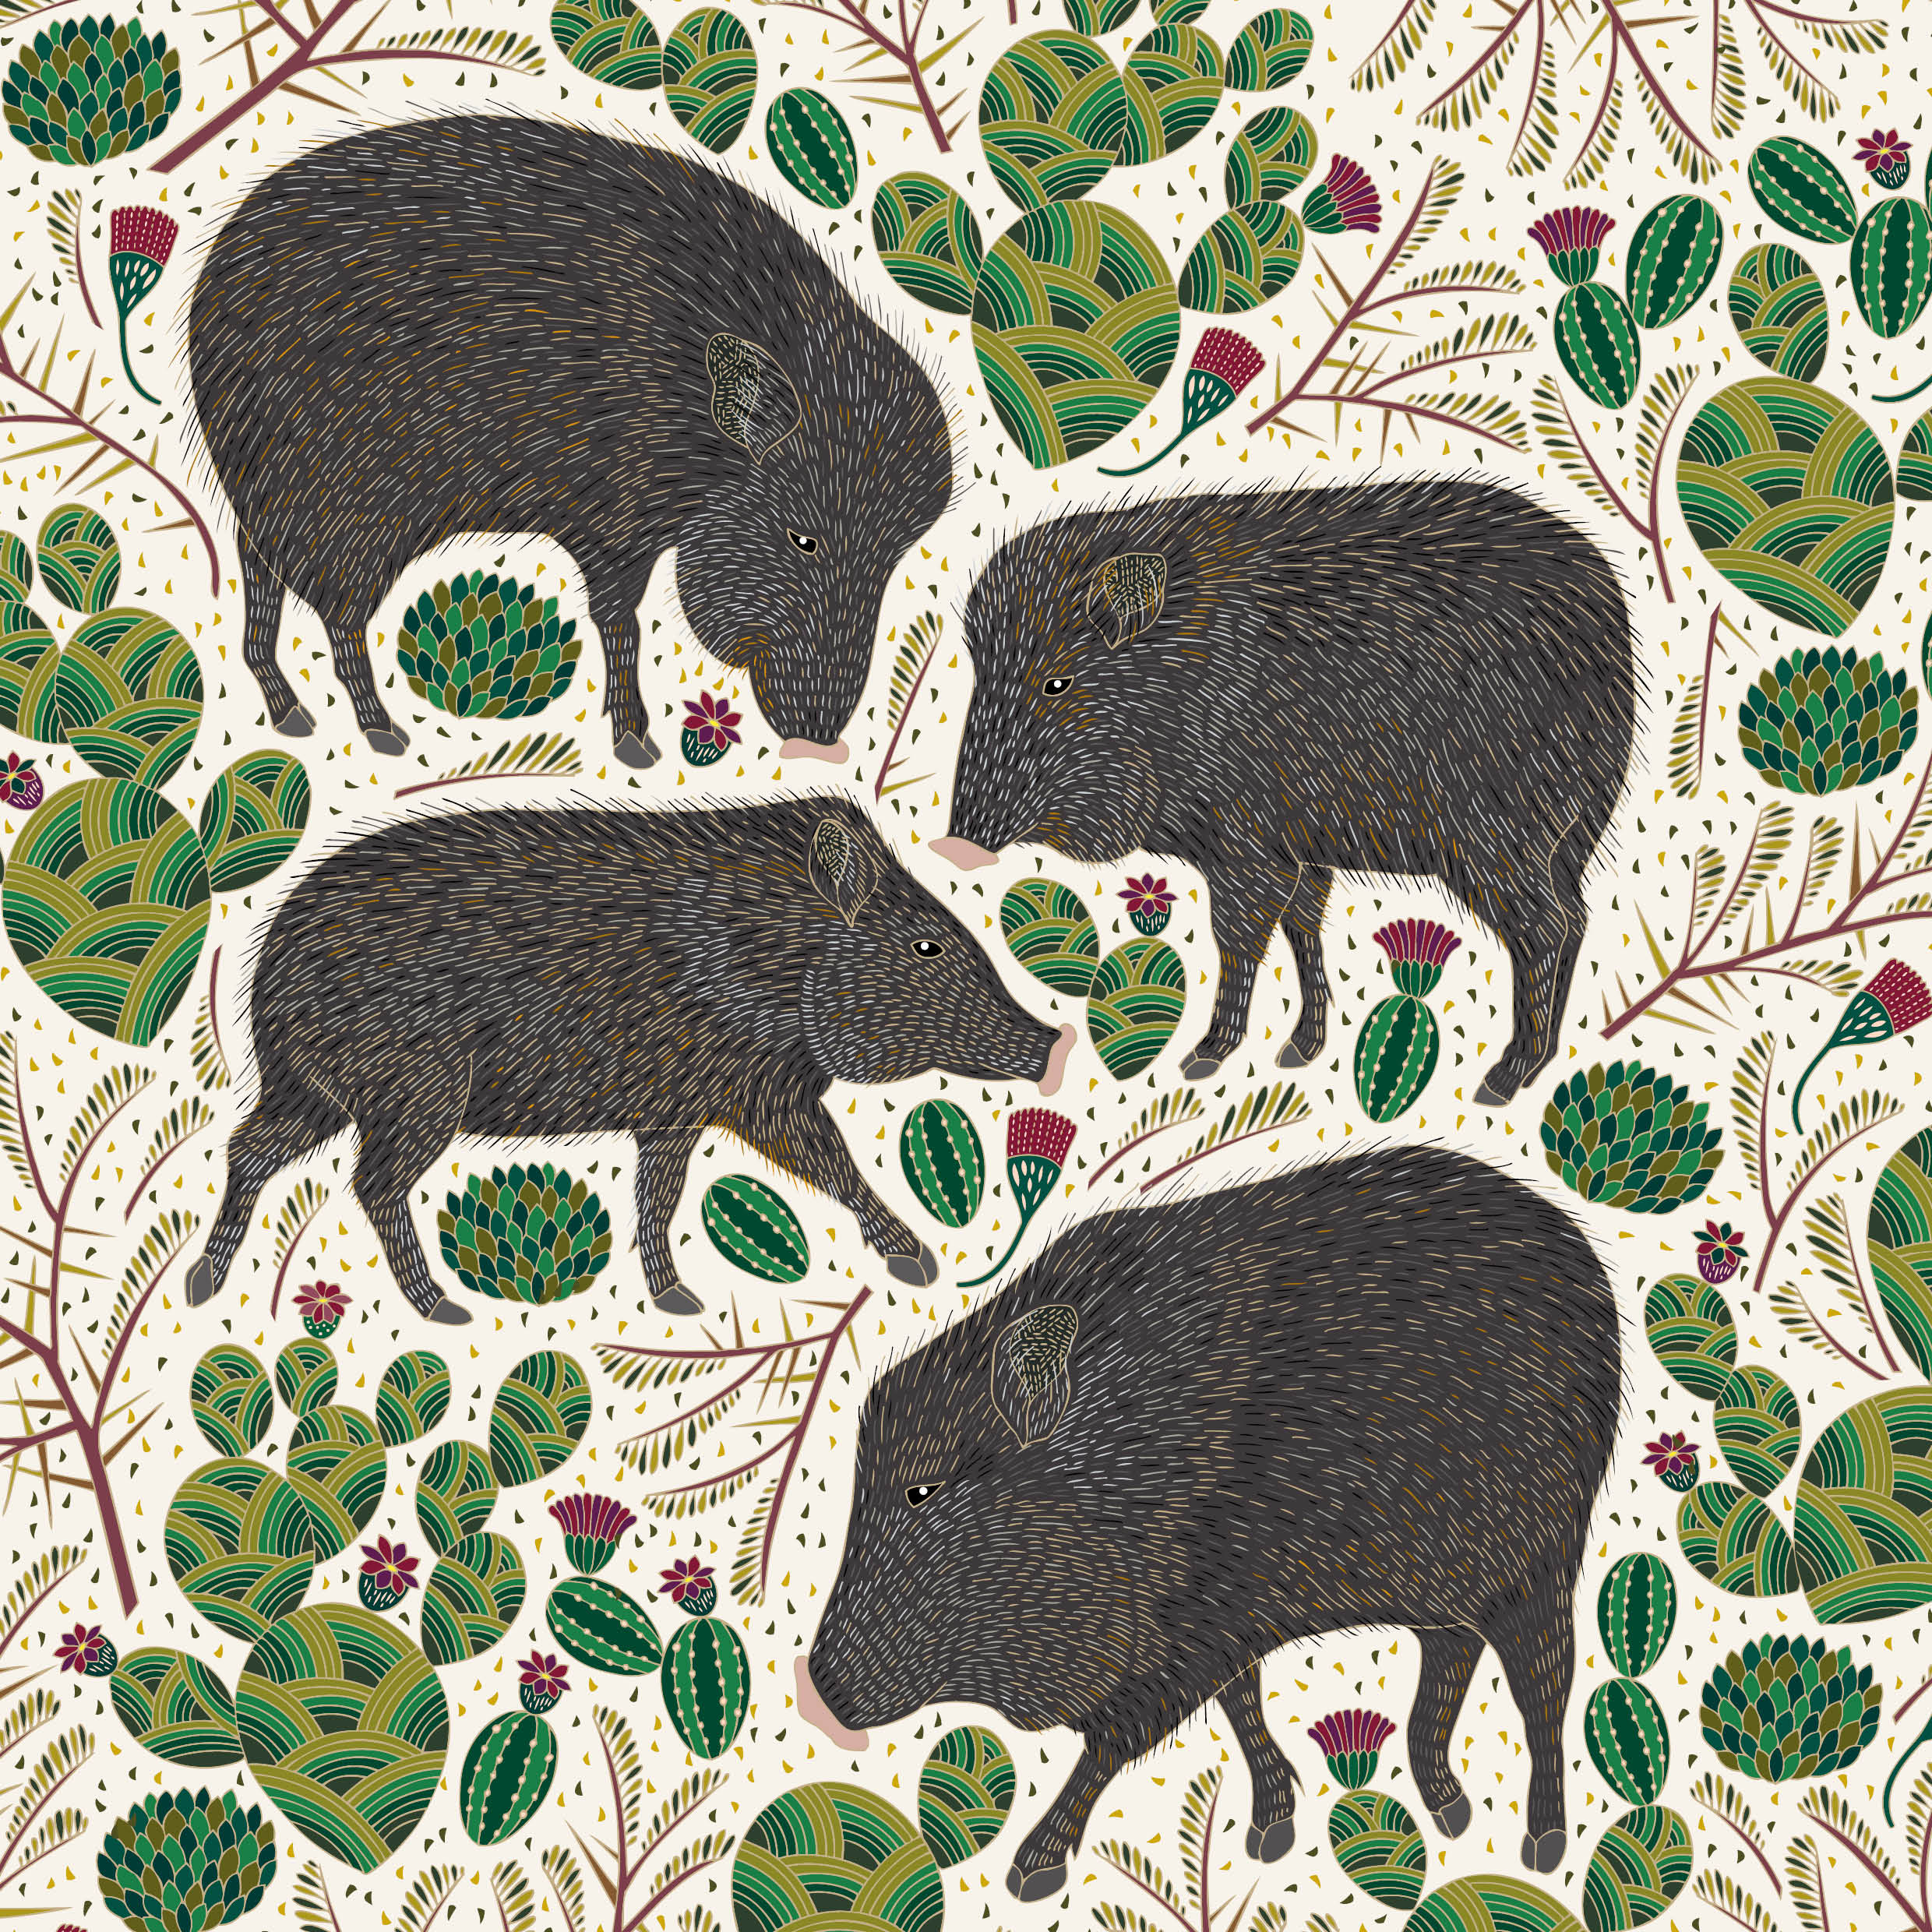 An illustration of a chacoan peccary by Millie Marotta. It looks similar to a wild pg